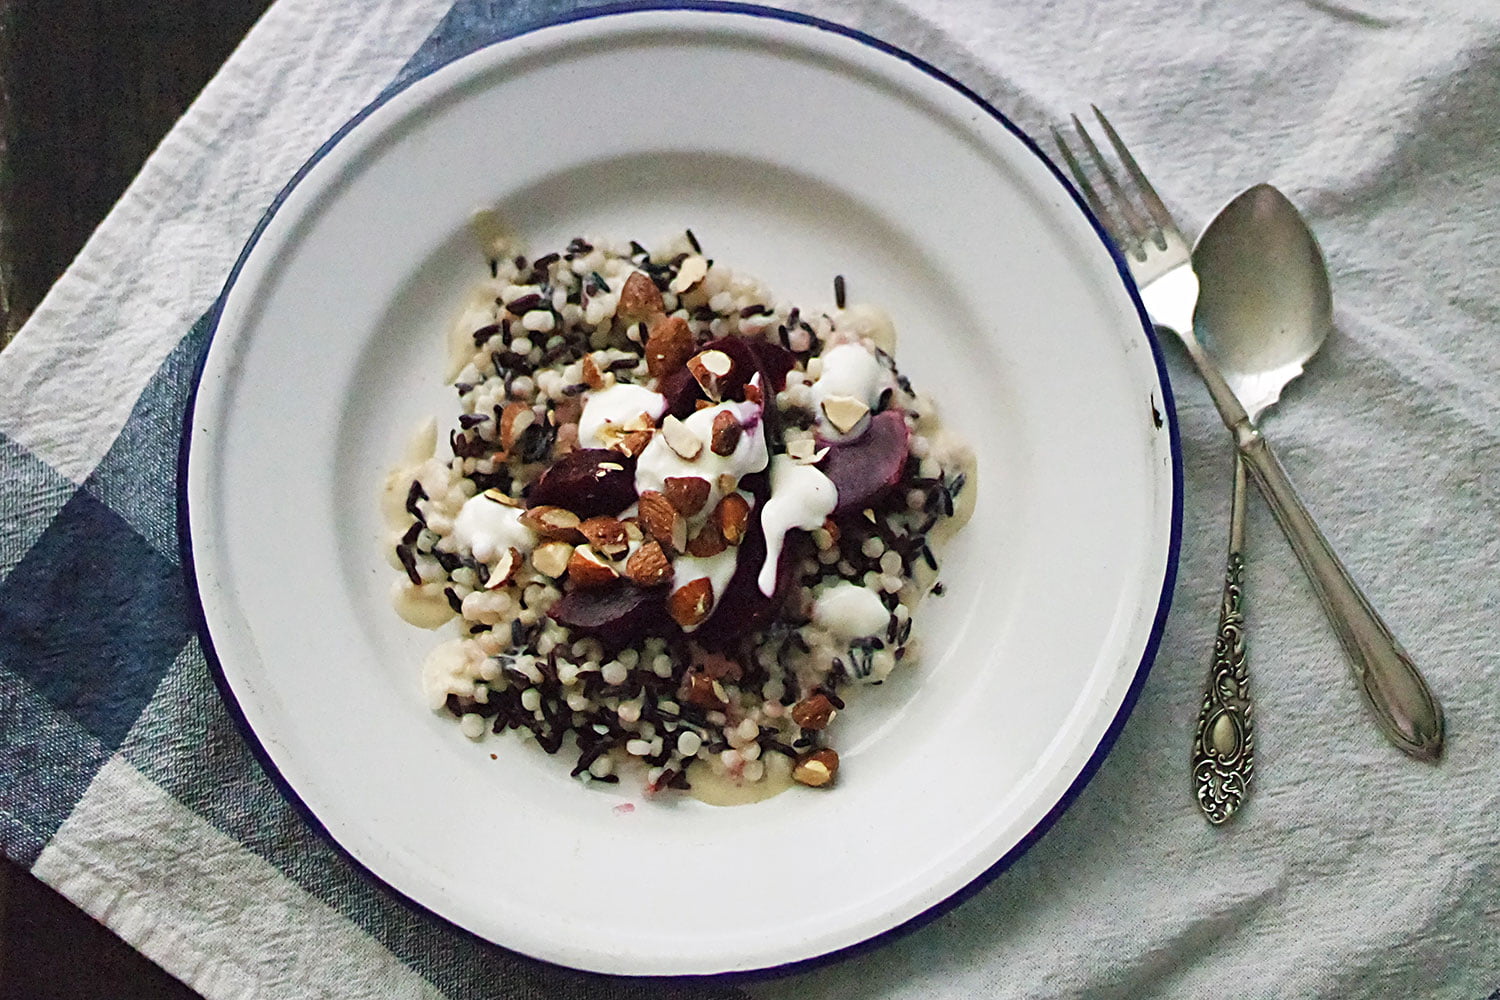 A salad of black rice and pearl cous cous, served with a roasted garlic and tahini dressing, greek yoghurt, baby beetroot and smoked almonds. Here, it's served on a blue-rimmed tin plate and laid next to a fork and spoon, on a blue tea towel.